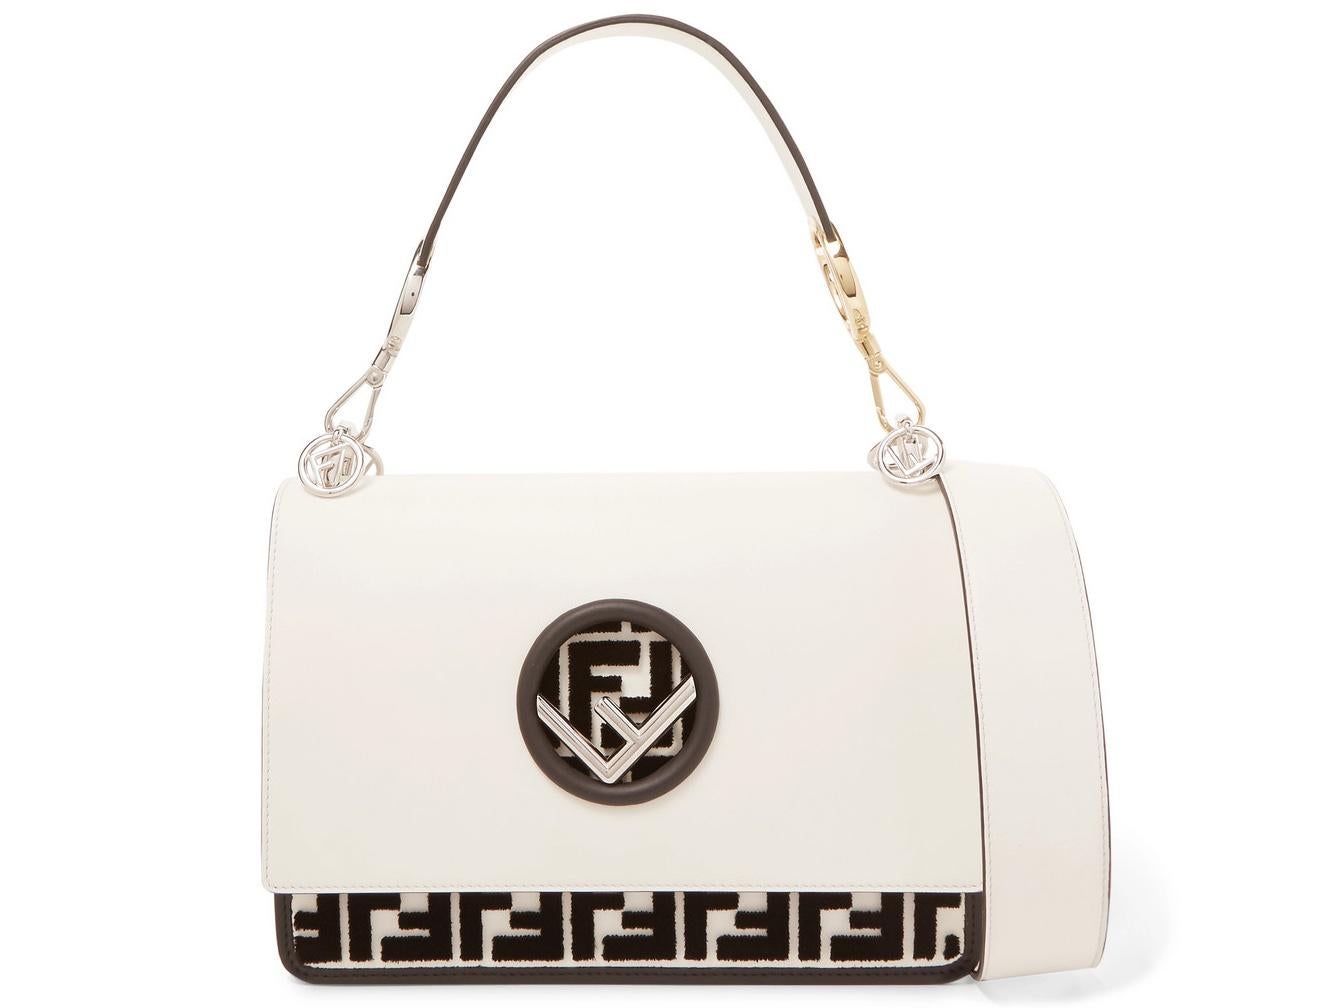 Fendi launches exclusive capsule collection with Net-a-Porter